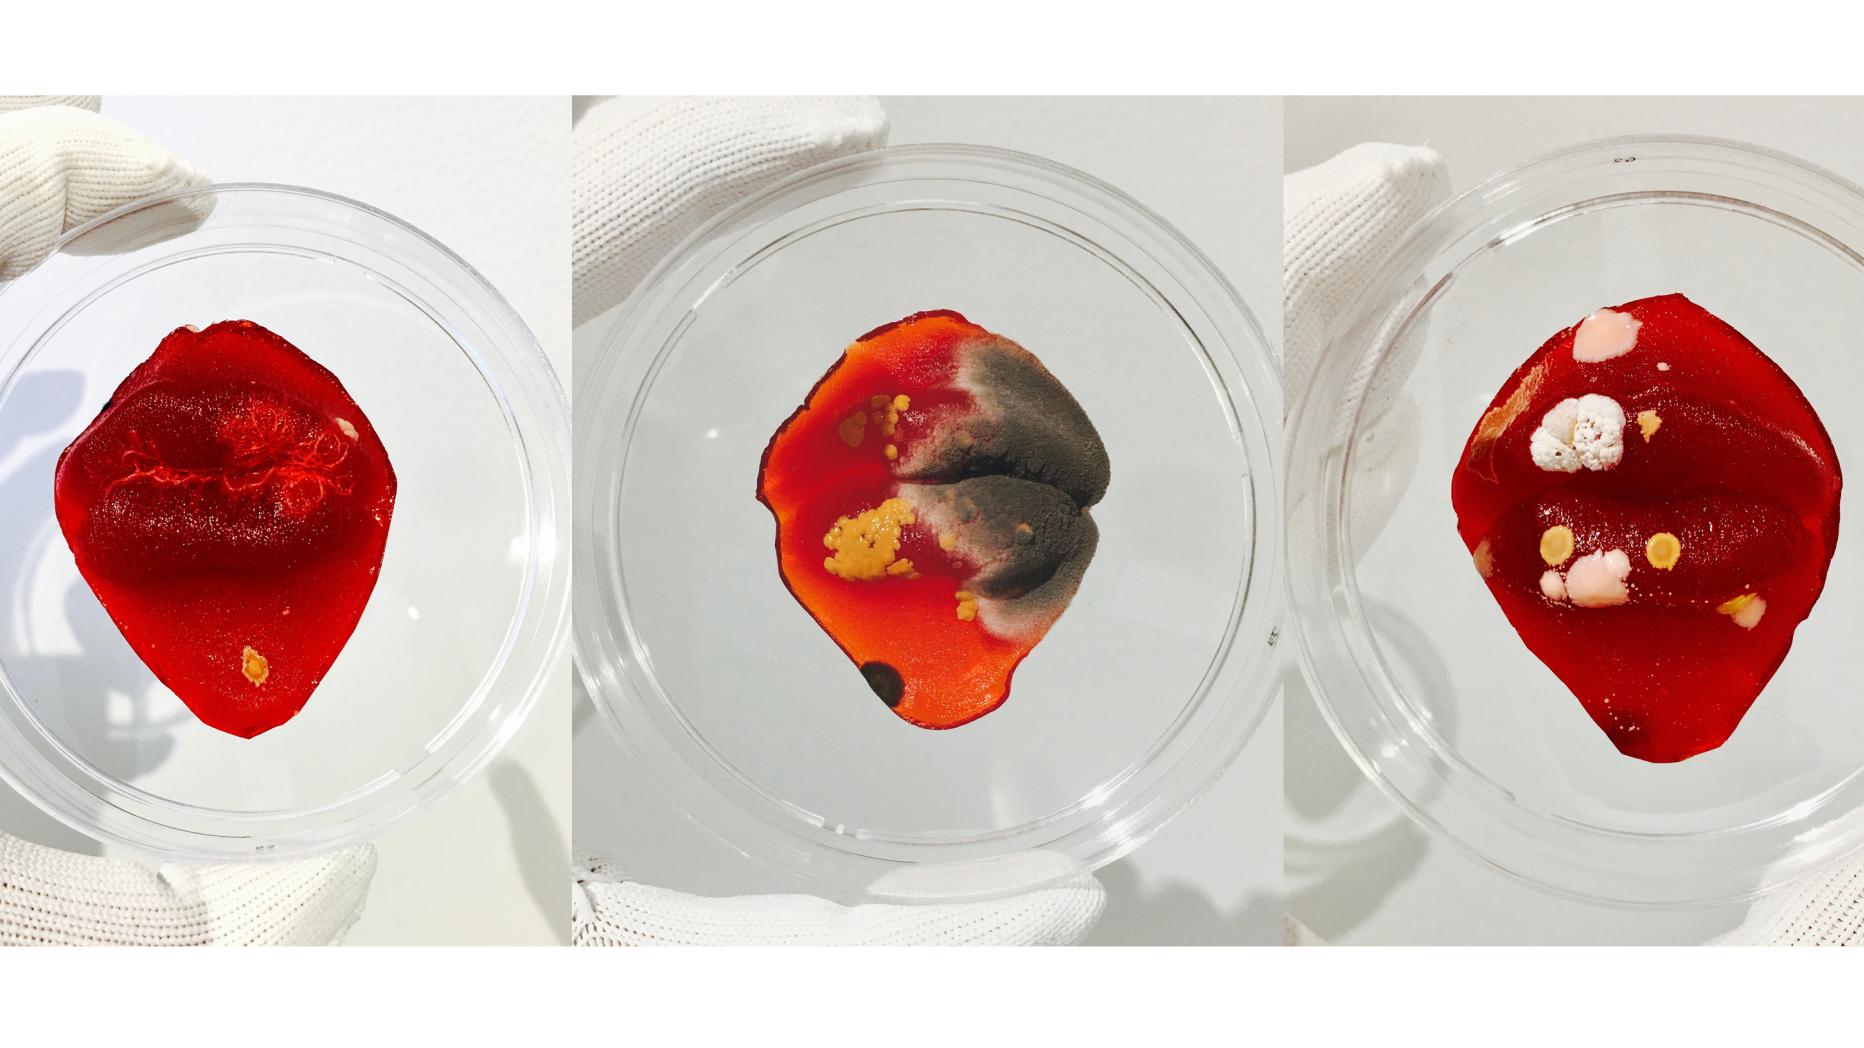 Three petri dishes each with a pair of lips made of gelatinous material, each growing different bacteria/molds 